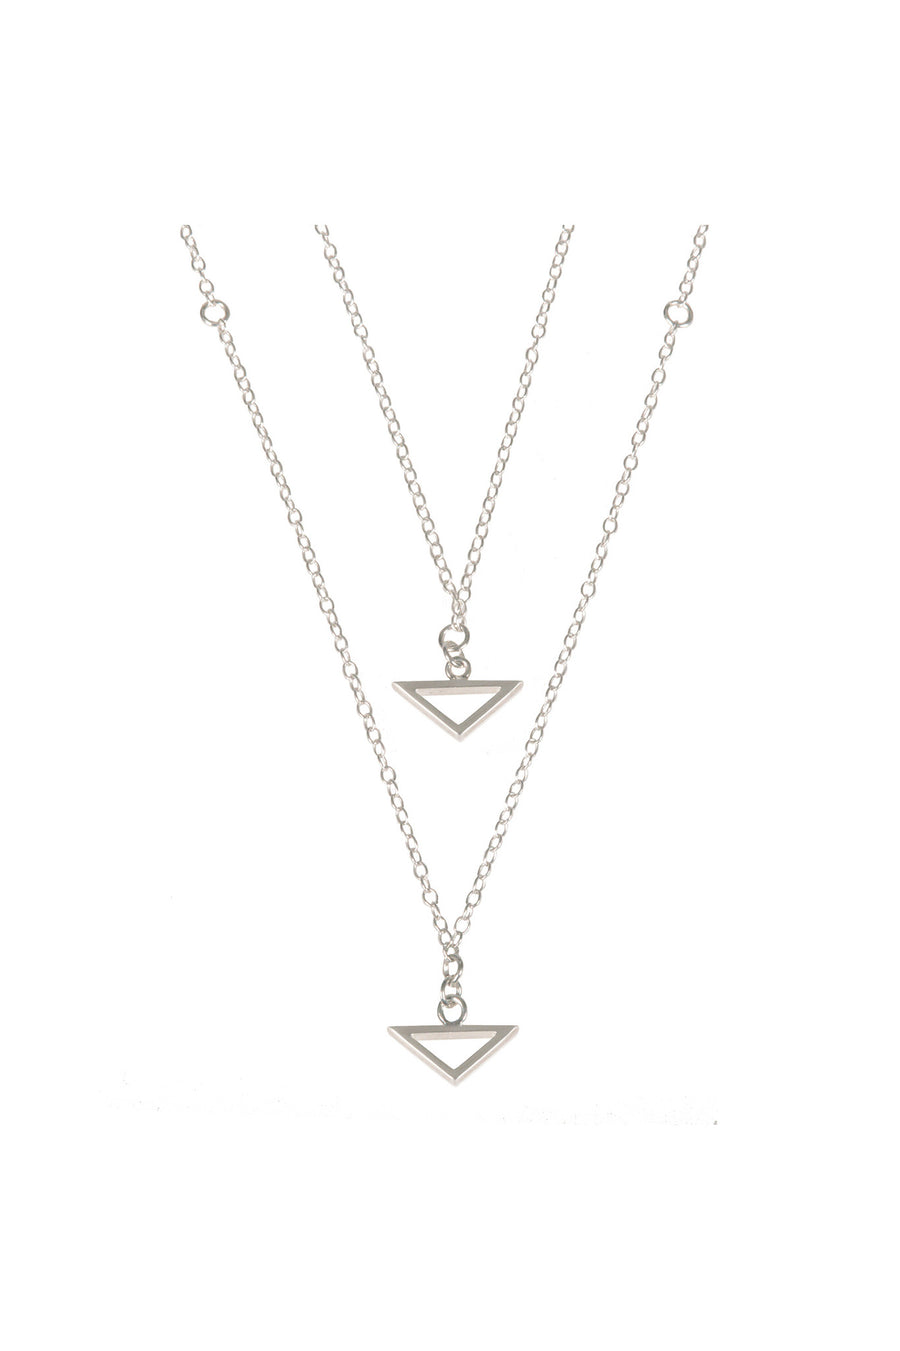 Double Trouble, Silver Multi-Layered Necklace